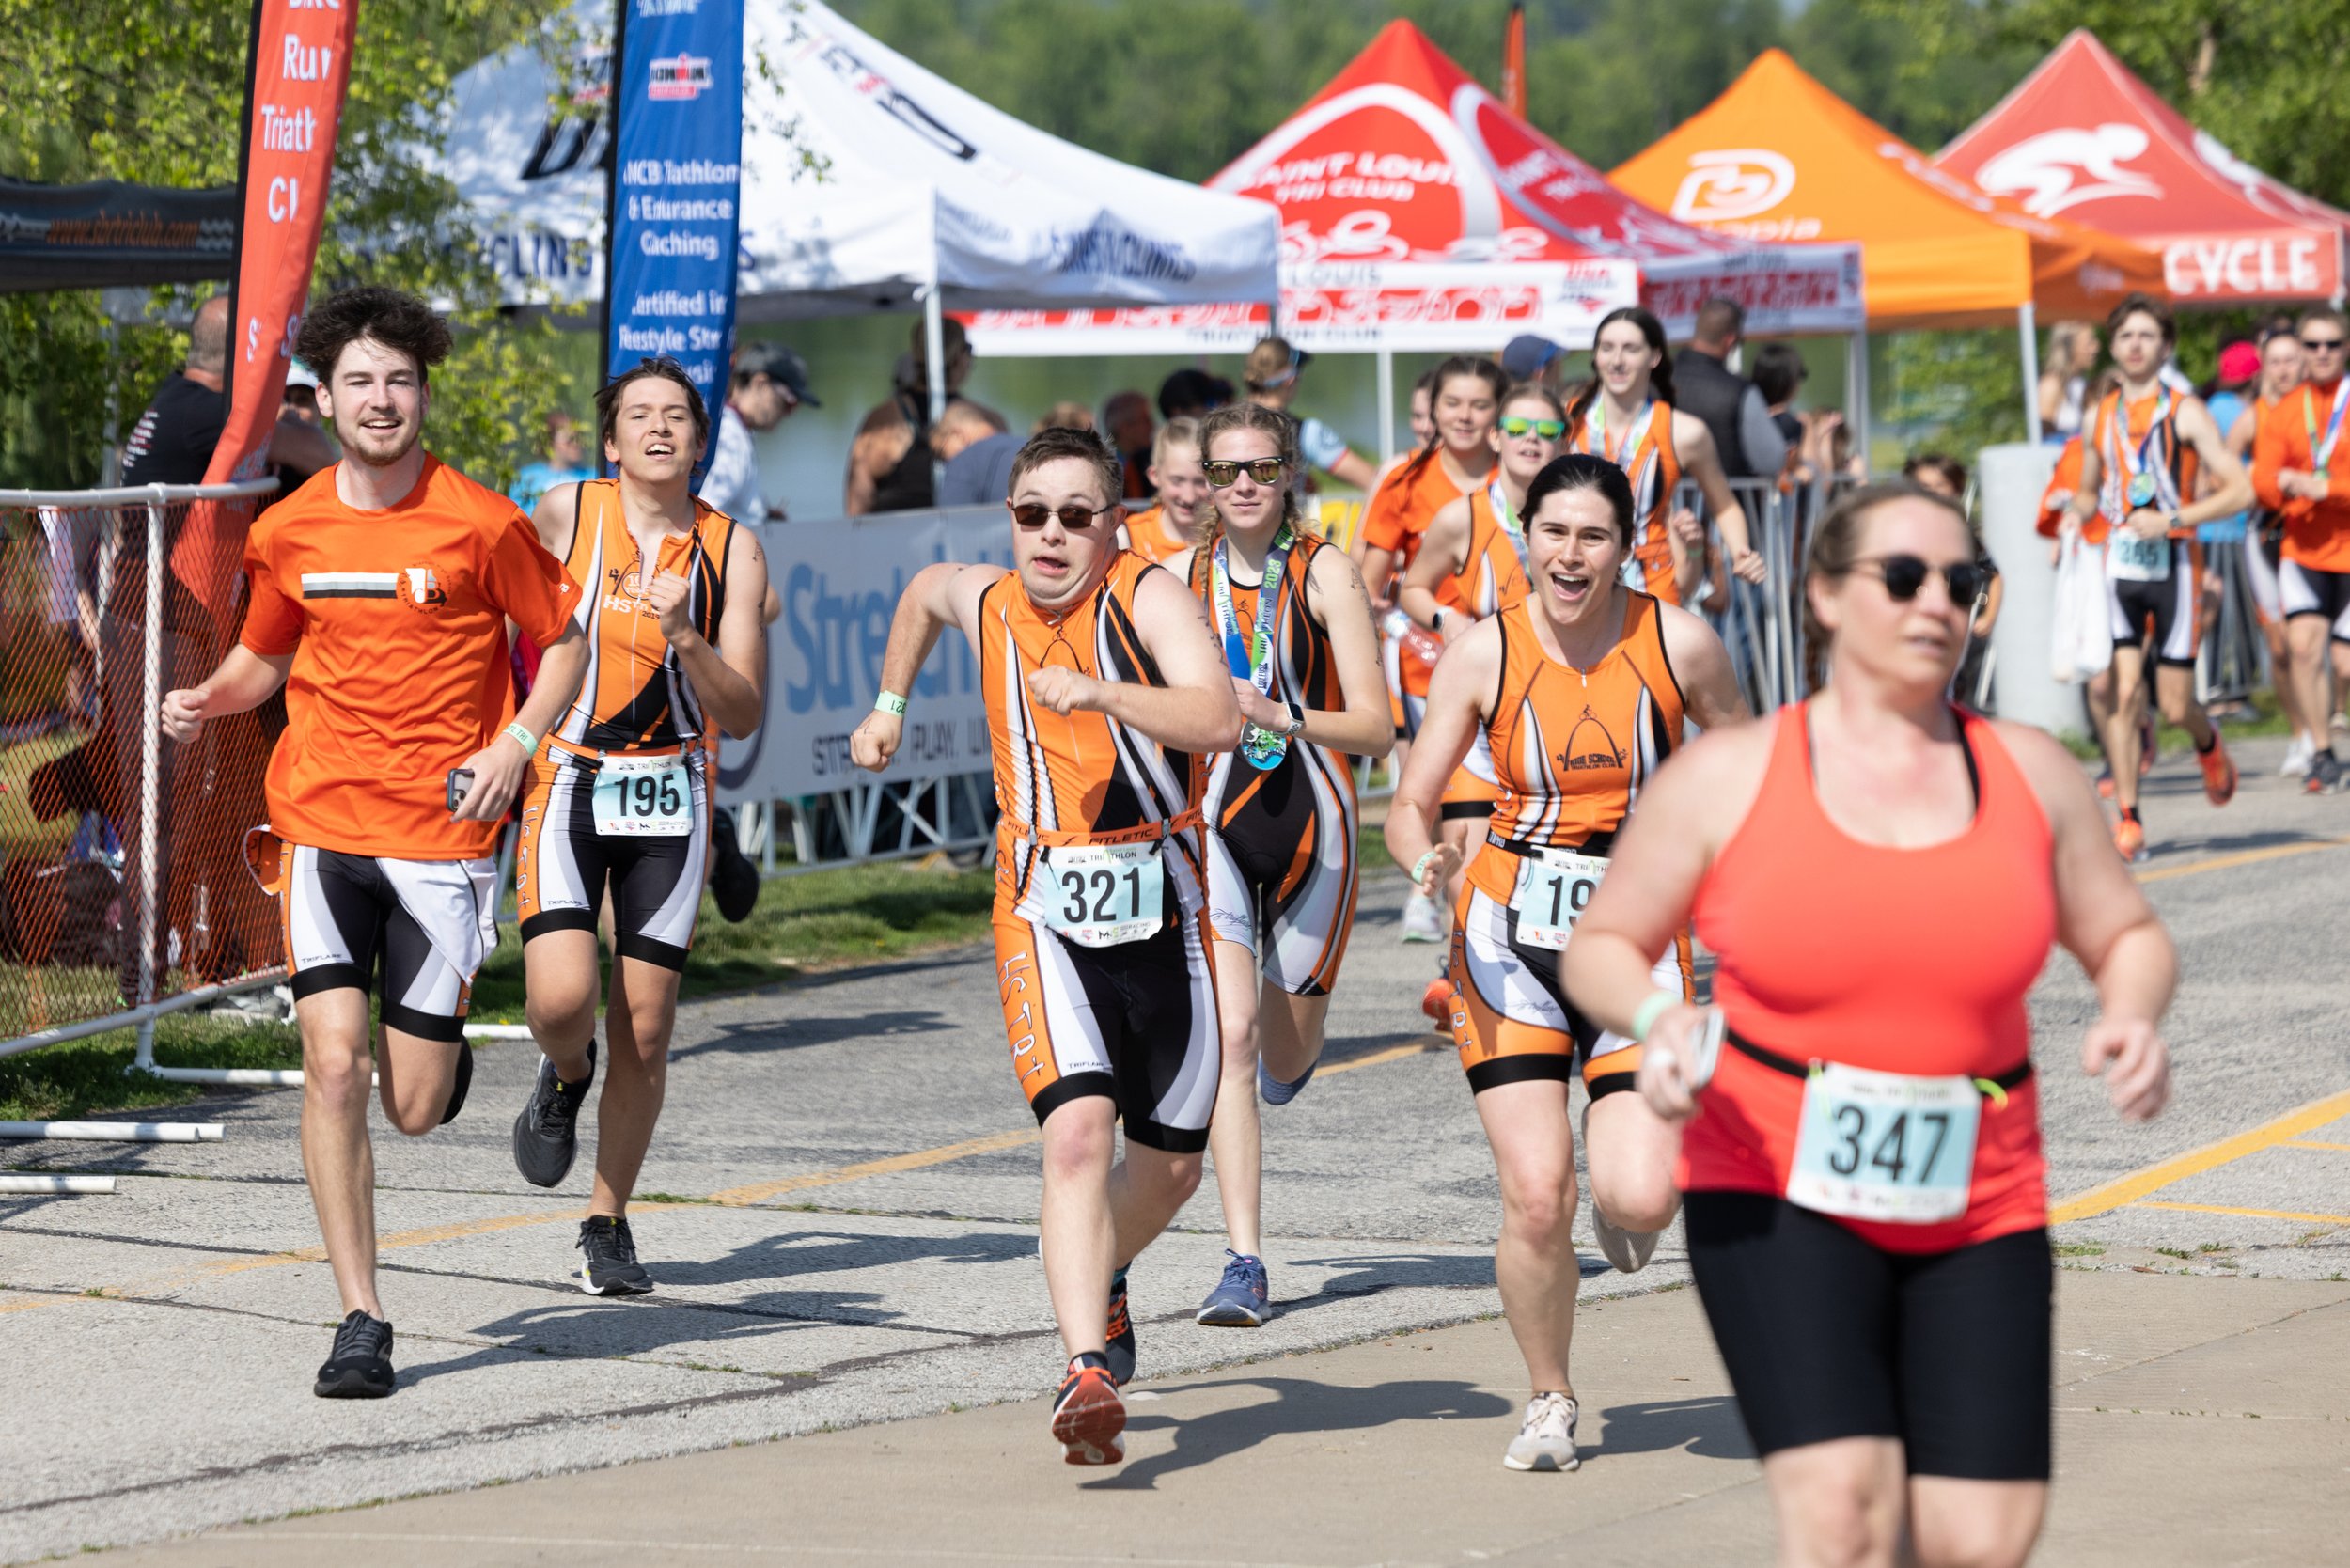  Gabriel ran toward the finish line of his second triathlon of the year May 21 at Creve Coeur Lake. Members of the High School Triathlon Club accompanied Cobb to the finish line as is the team's tradition with its last athlete to finish a race. 